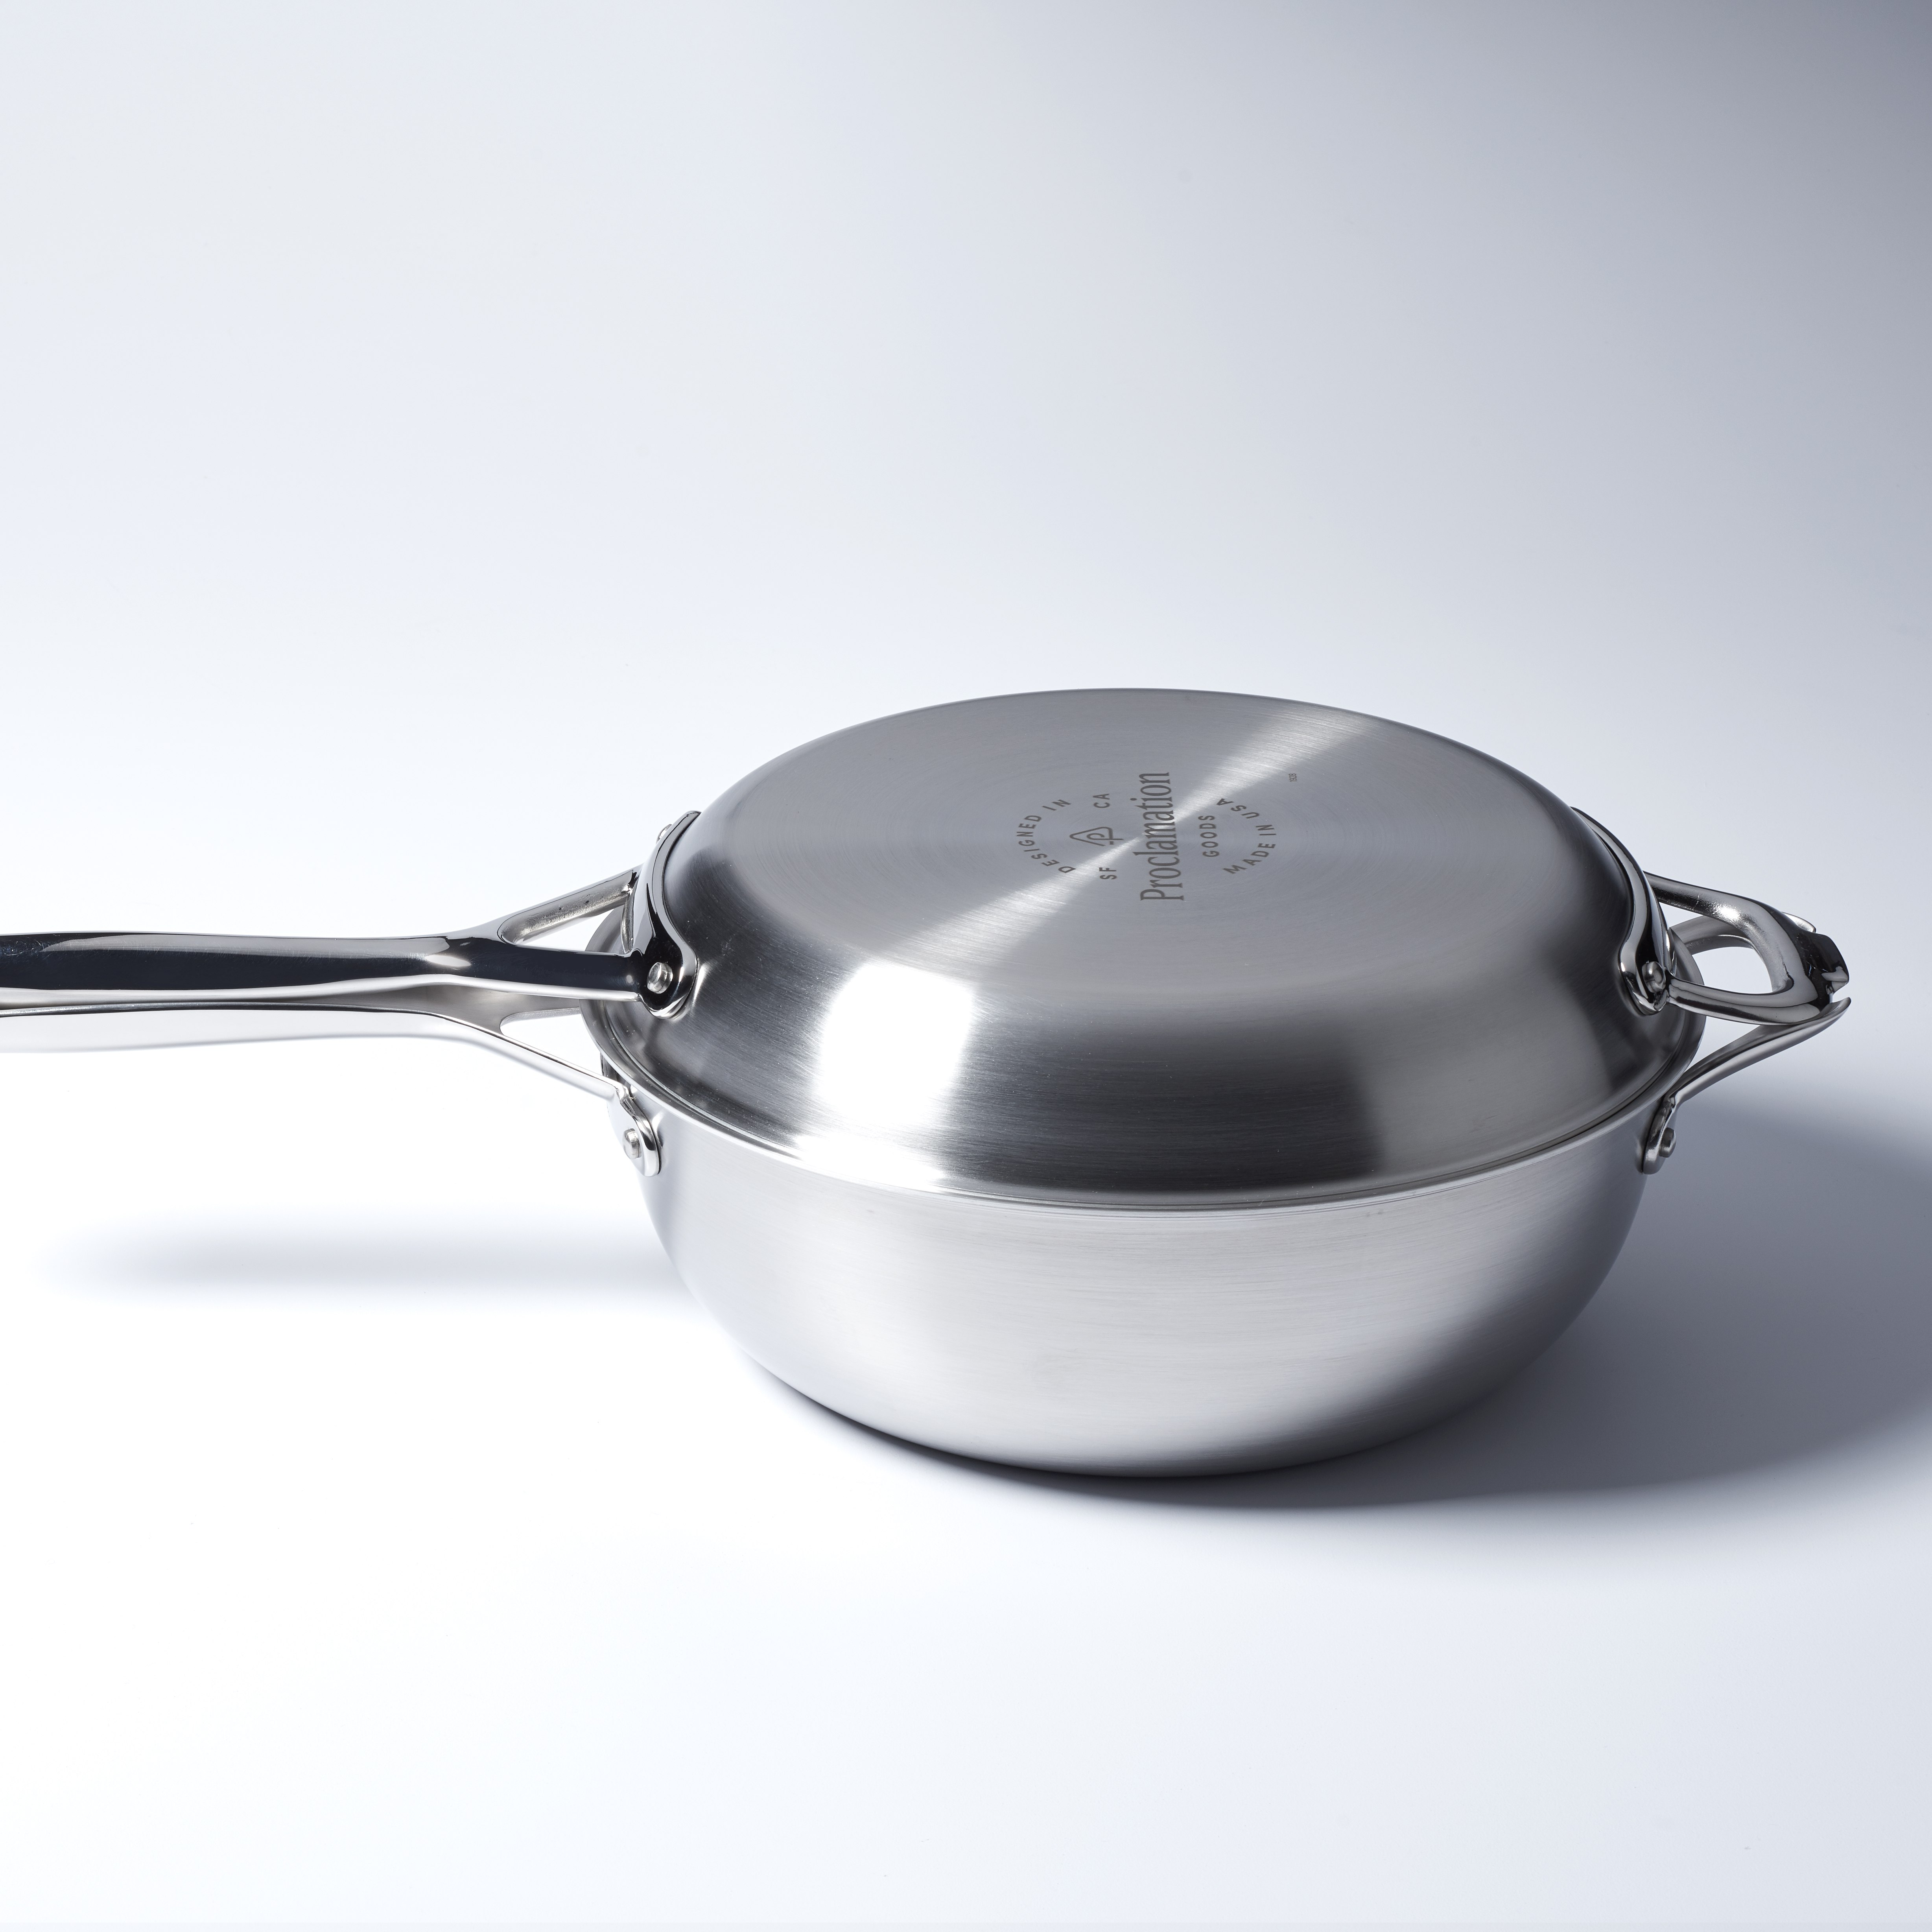 https://huckberry.imgix.net/spree/products/627439/original/3Ywvg9DXX2_proclamation-goods-co_stainless_steel_duo_for-the-home-chef_5_original.jpg